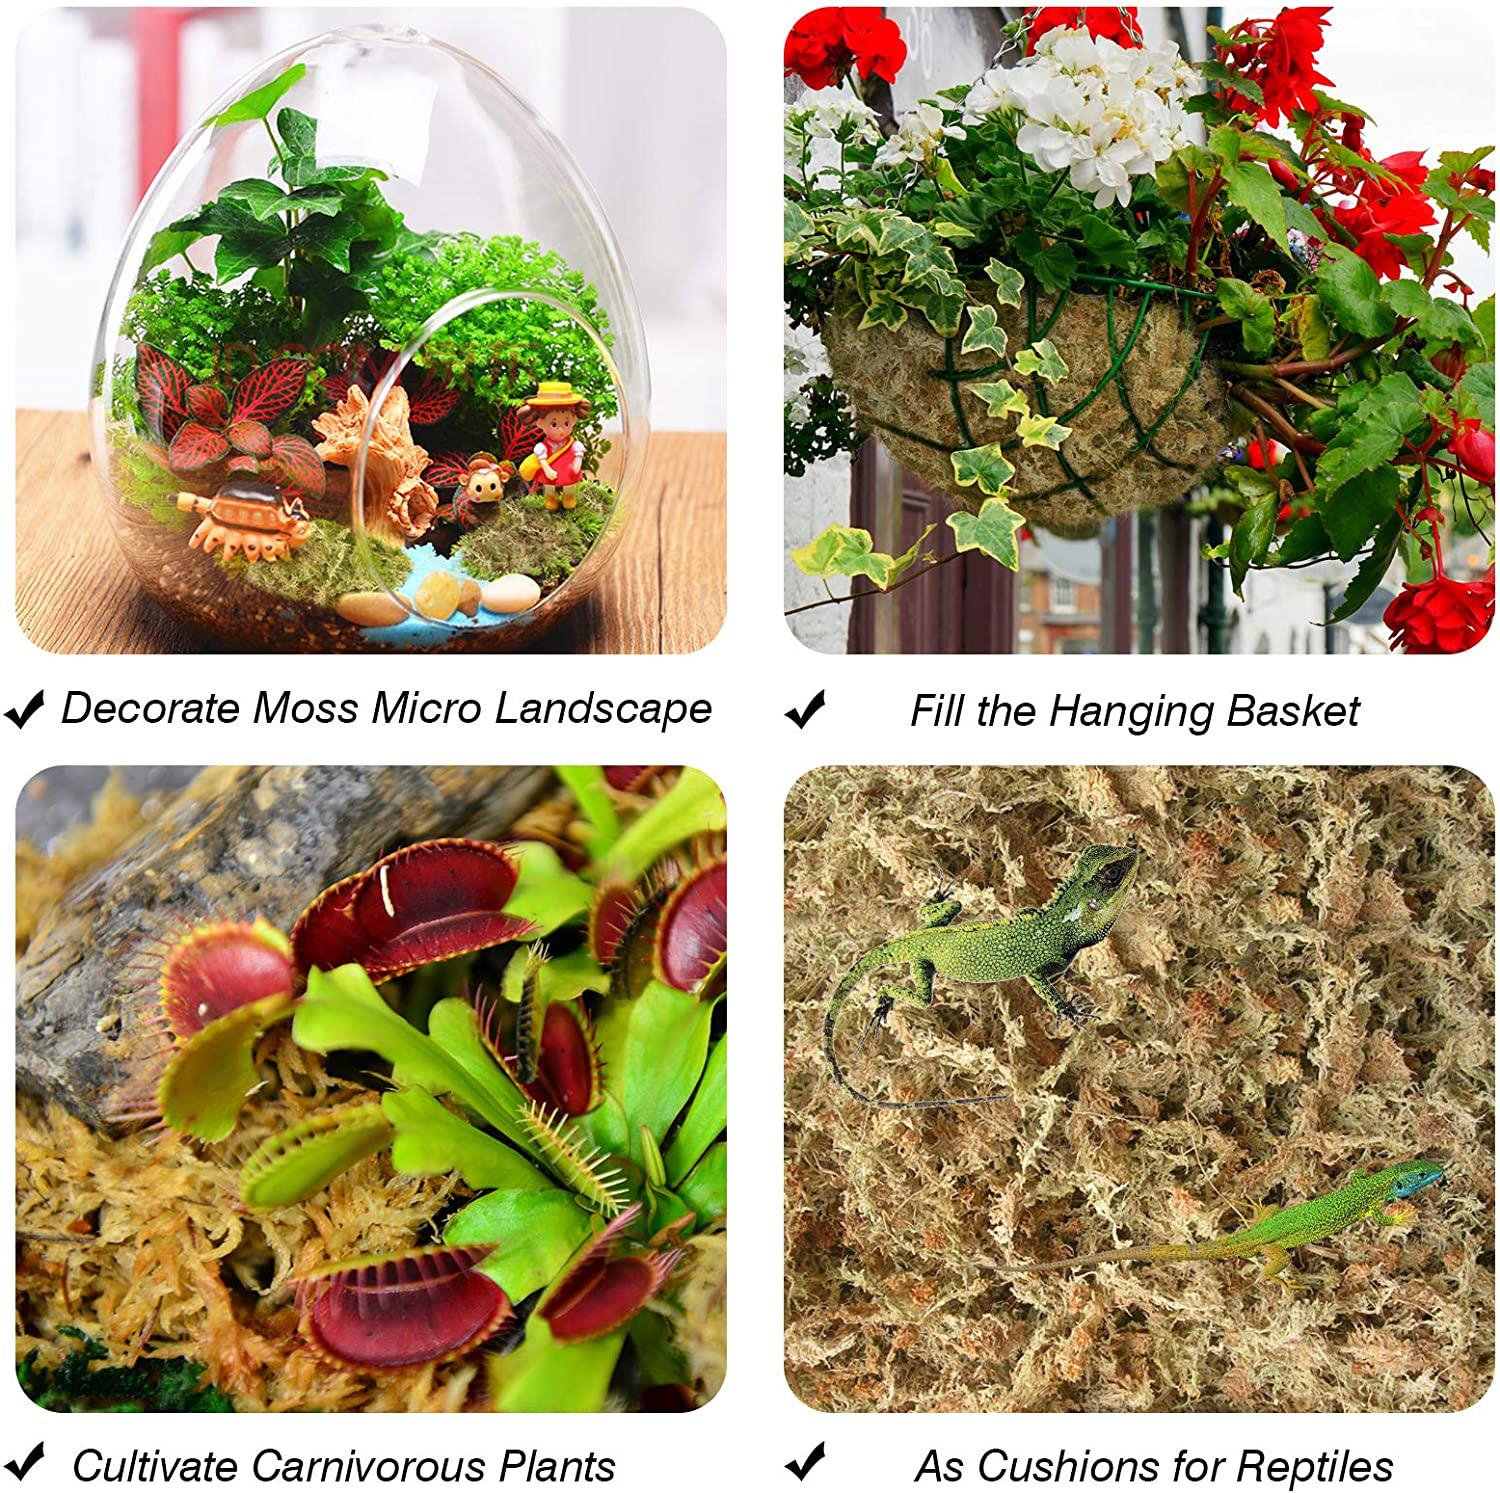 Natural Dried Sphagnum Moss for Orchids, Carnivores and Miniature